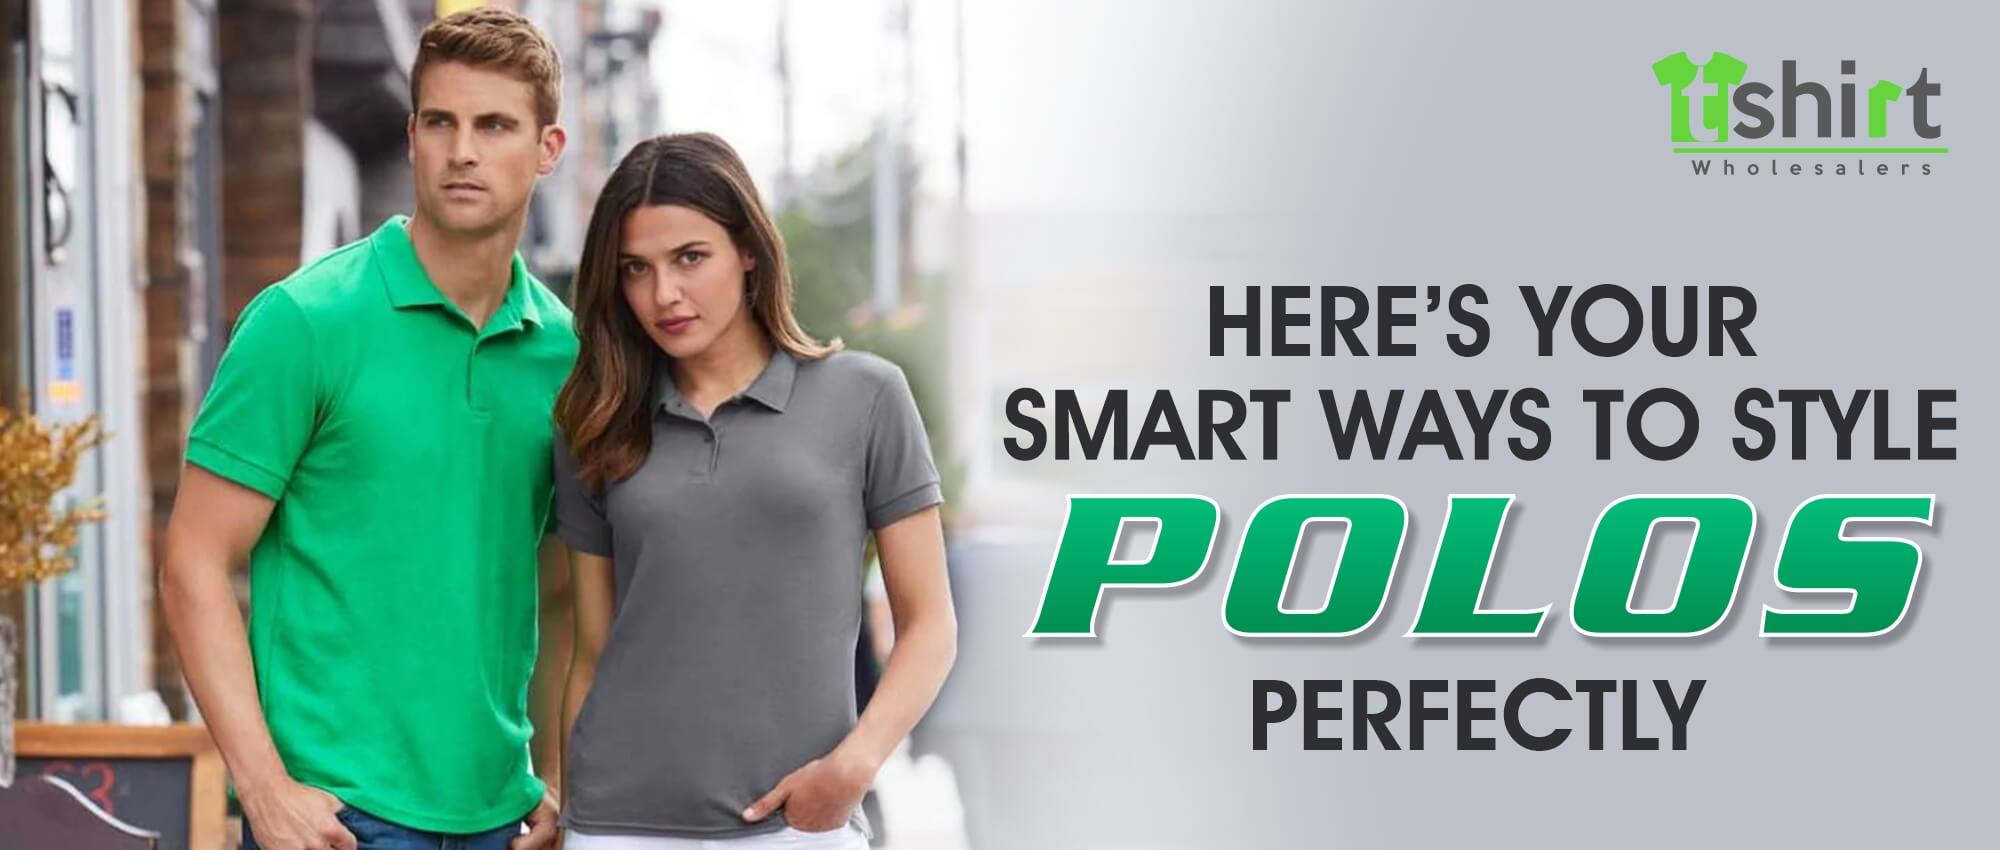 HERE’S YOUR SMART WAYS TO STYLE POLOS PERFECTLY